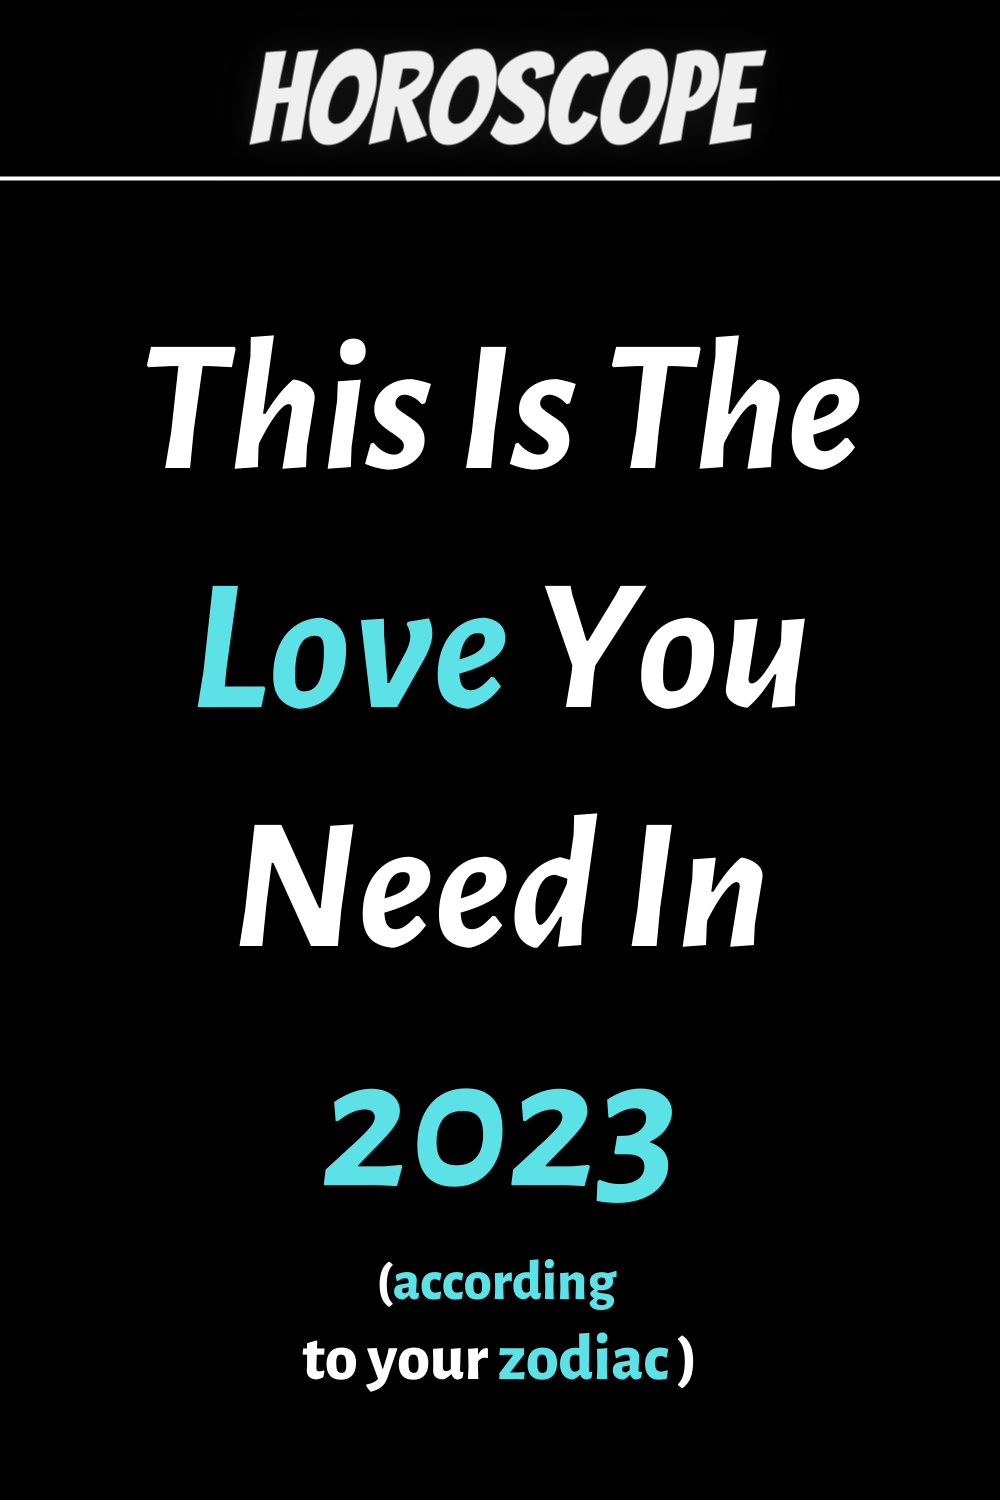 This Is The Love You Need In 2023, According To Your Zodiac Sign